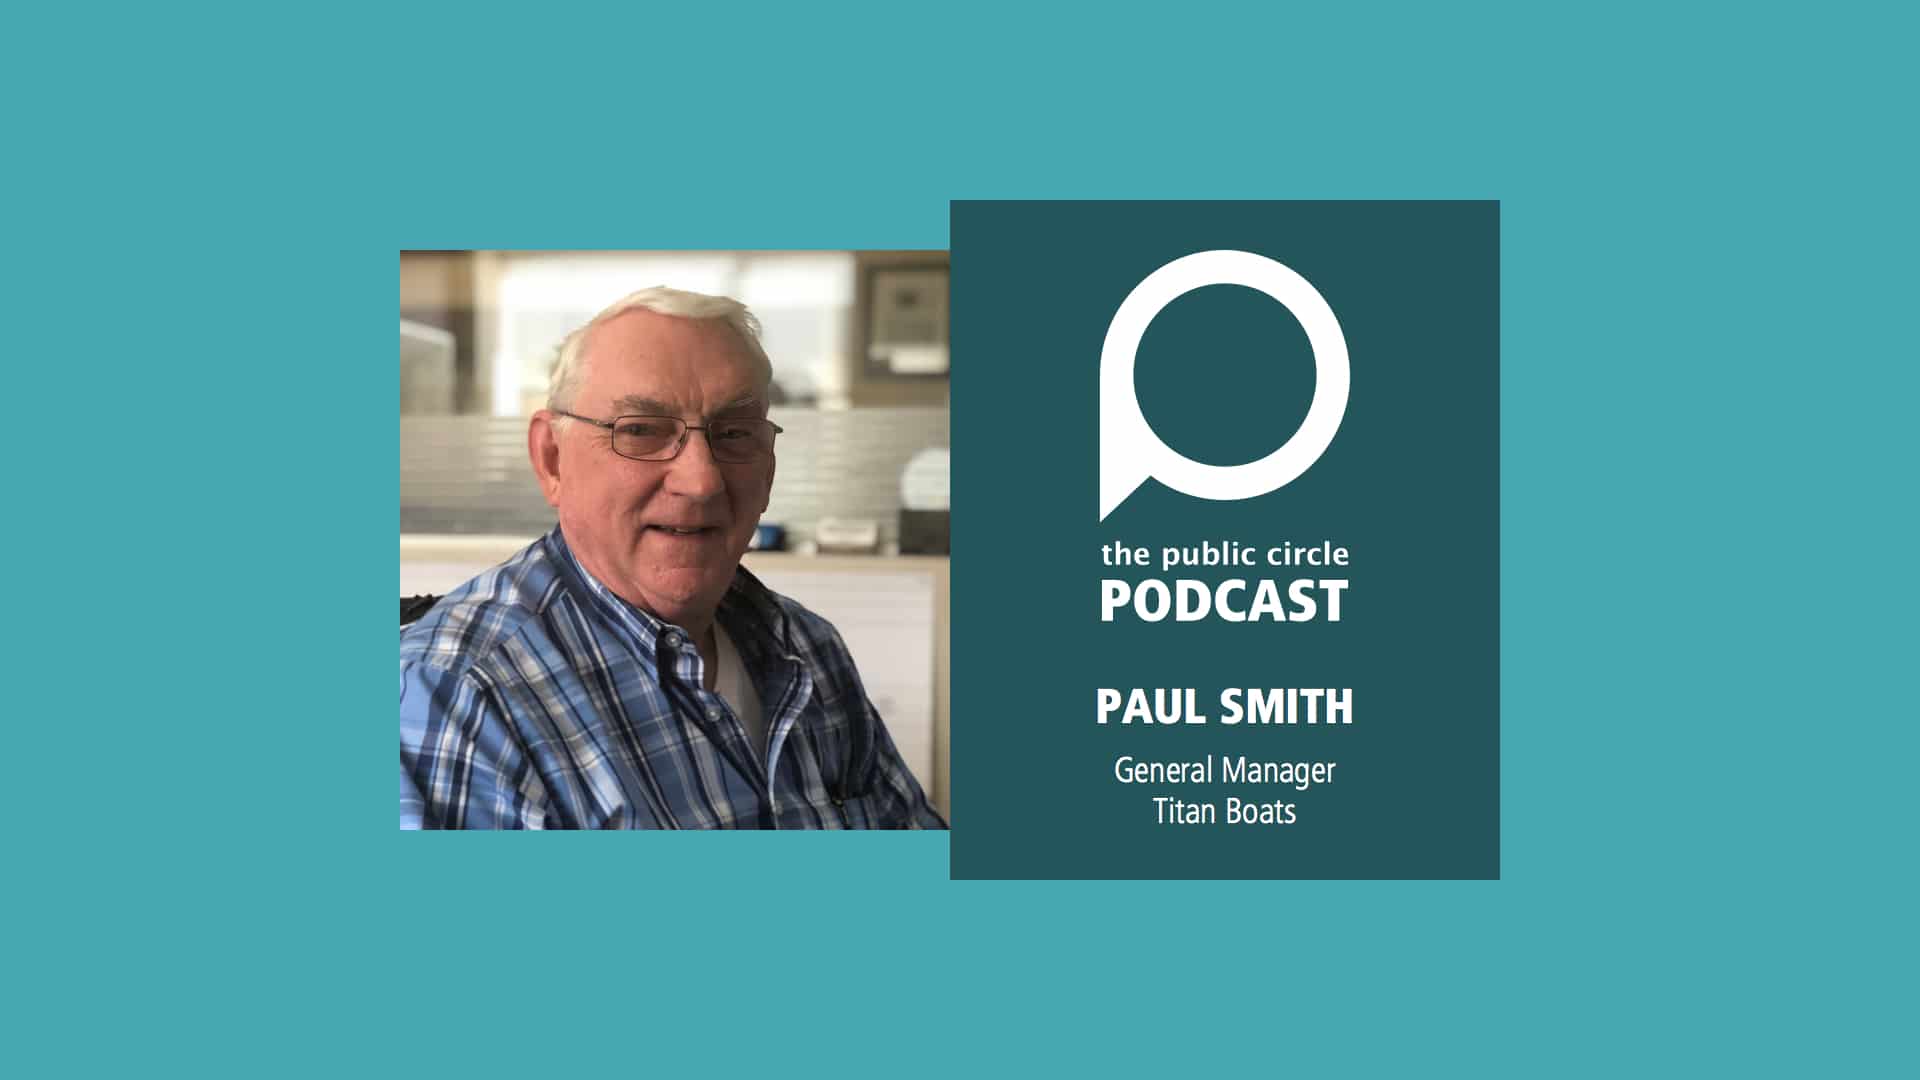 PODCAST: Paul Smith, General Manager of Titan Boats